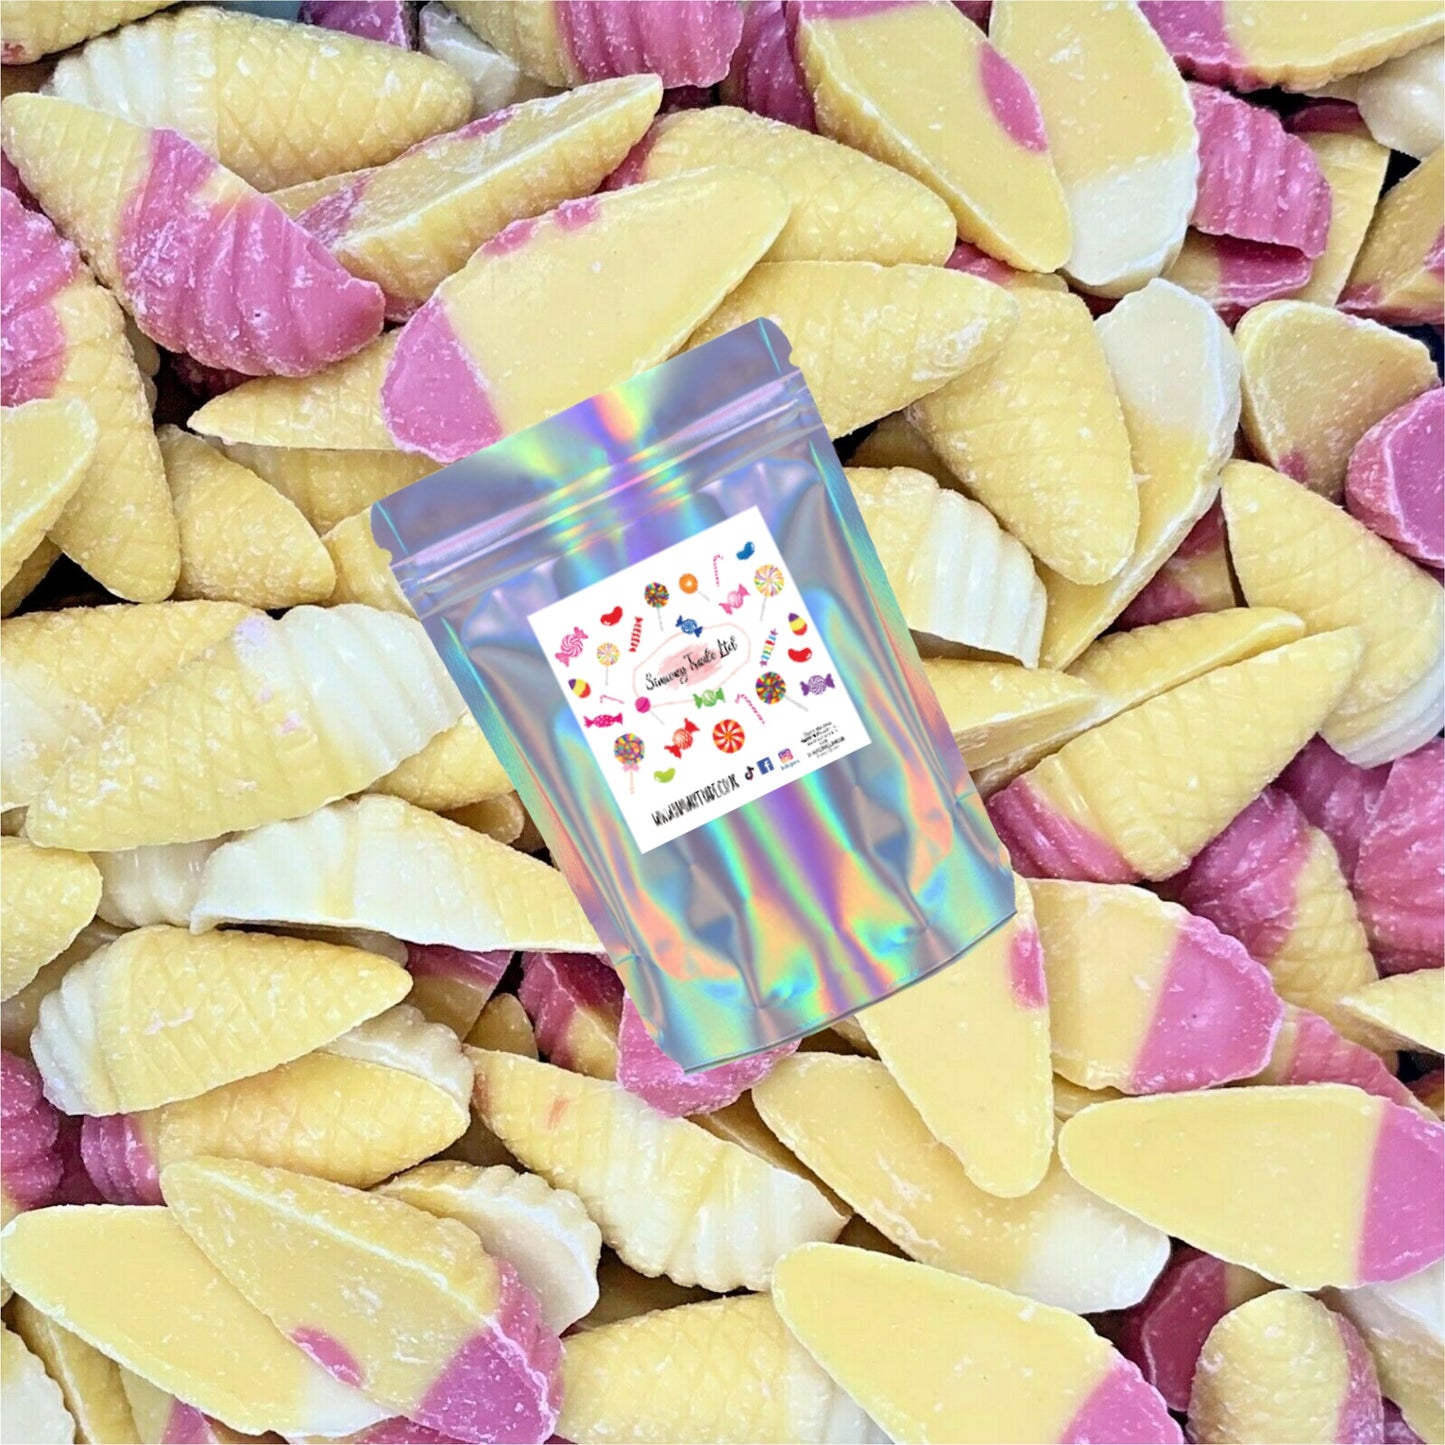 Pic 'N' Mix Bag Create Your Own 1 KG Bag